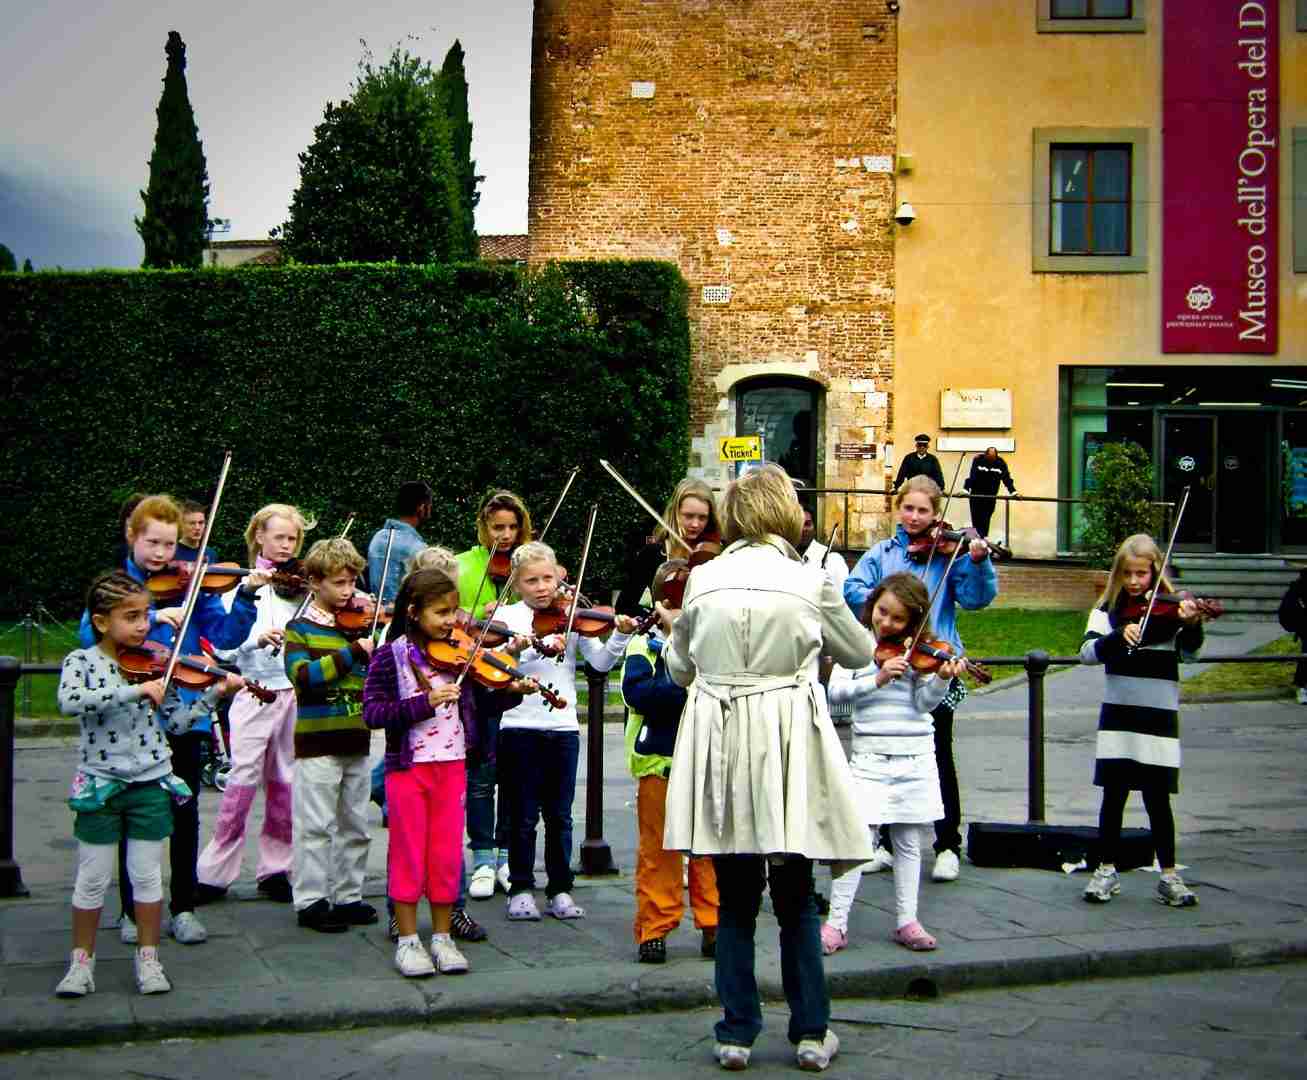 music teacher in front of children playing music